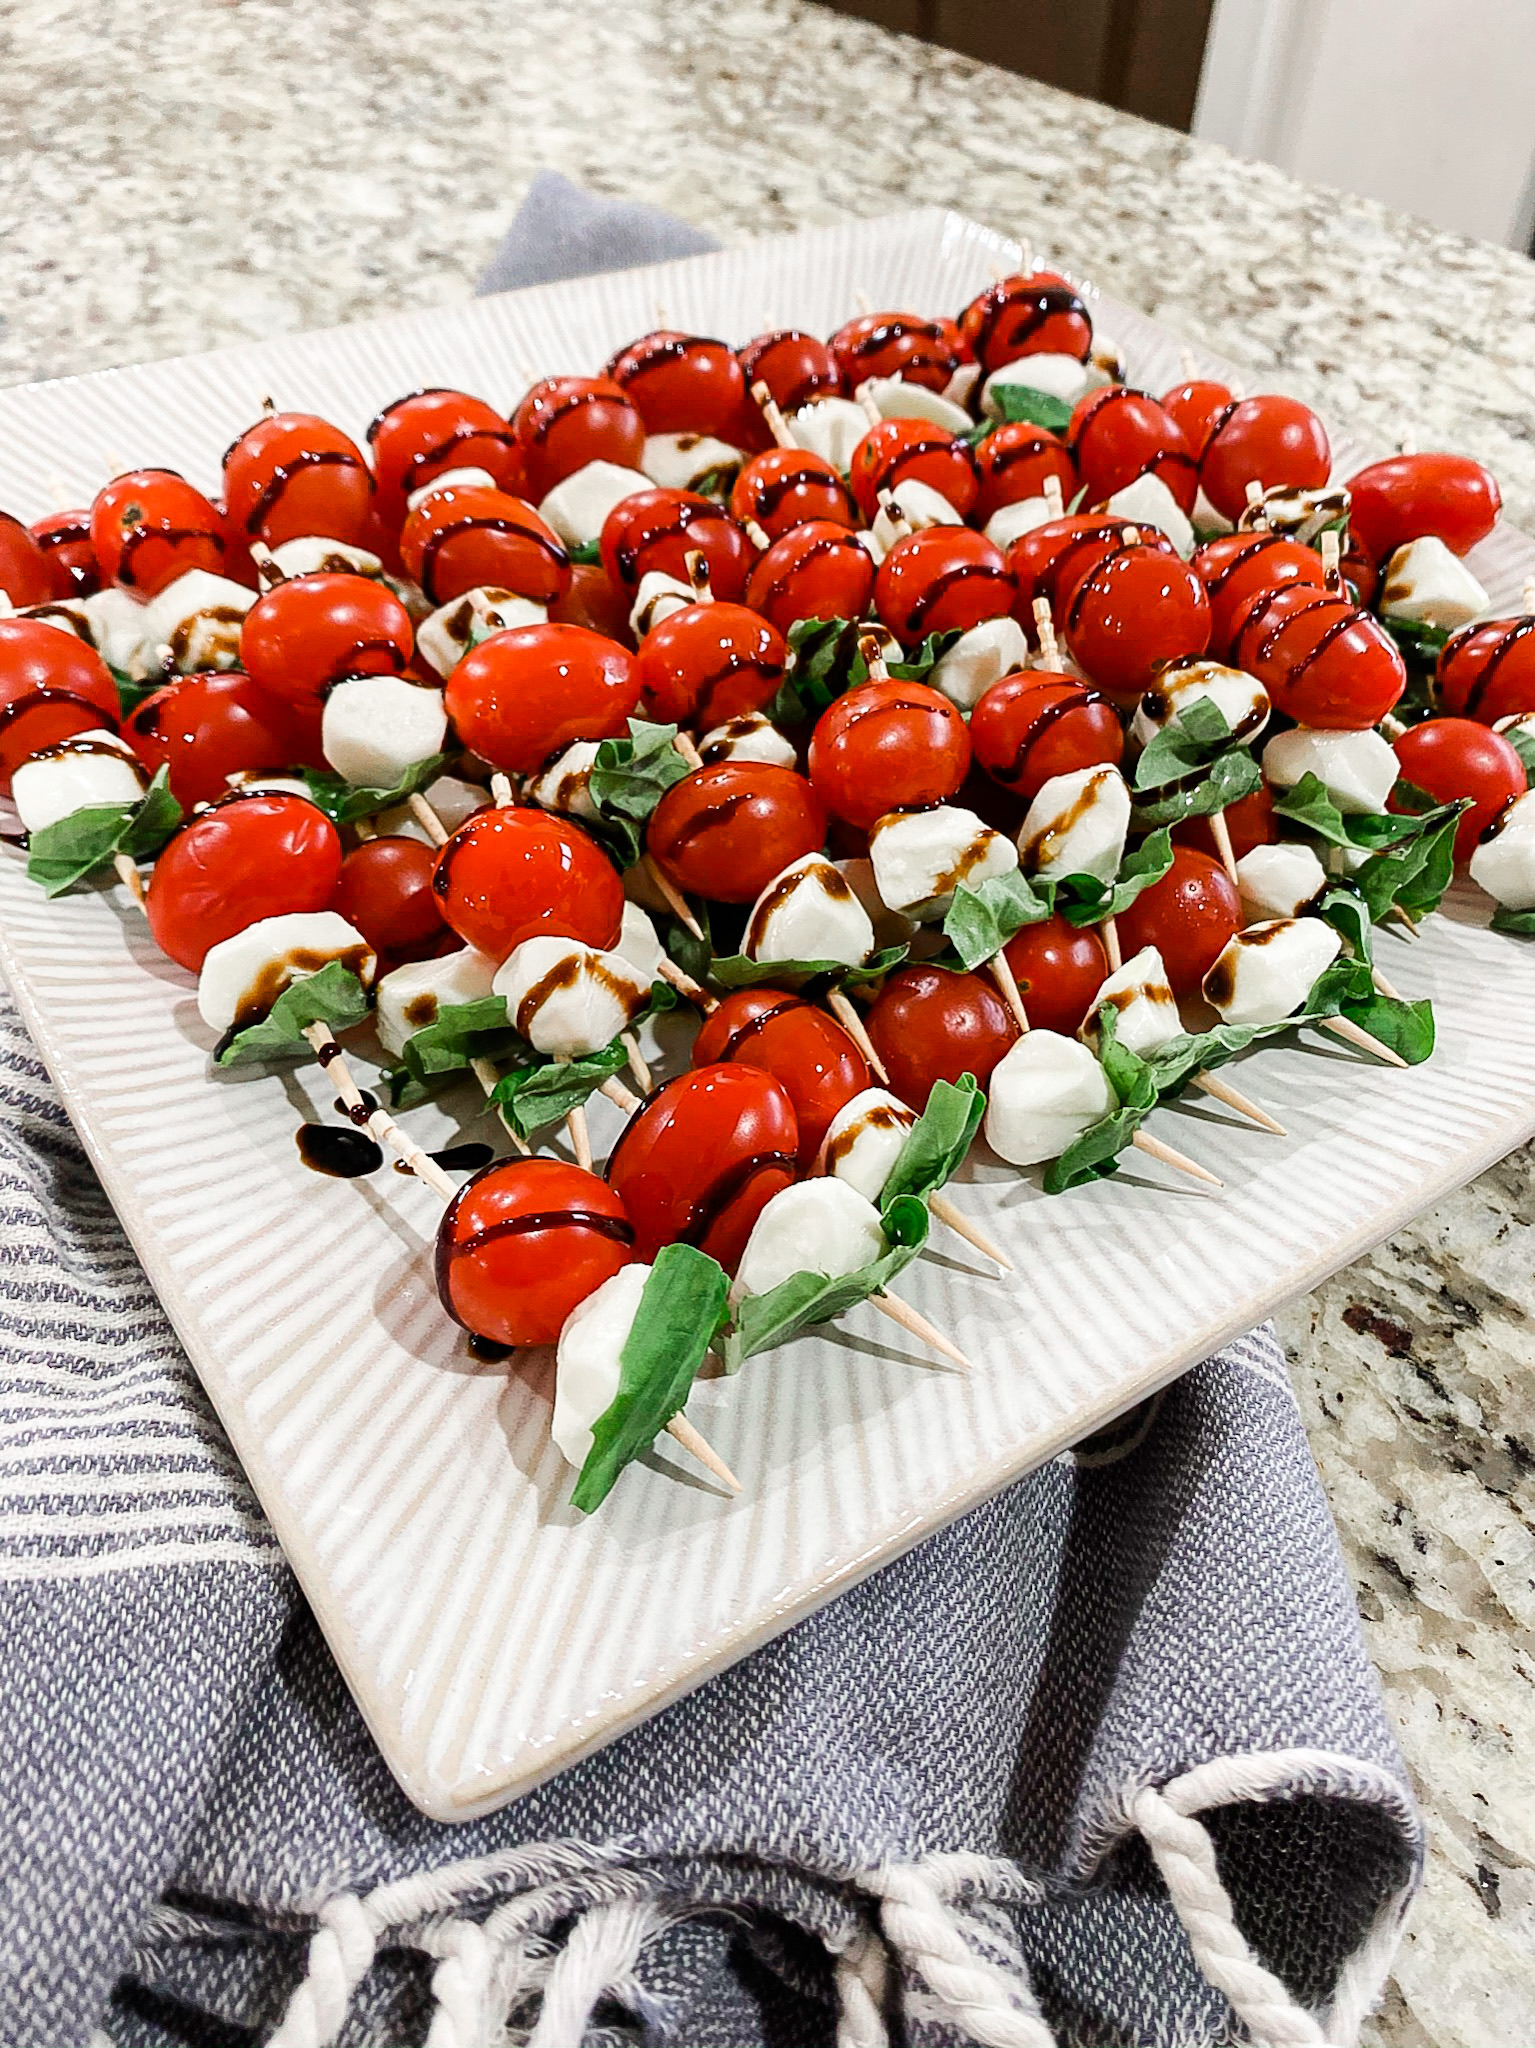 Easy And Quick Caprese Salad Skewers Recipe - Healthy By Heather Brown